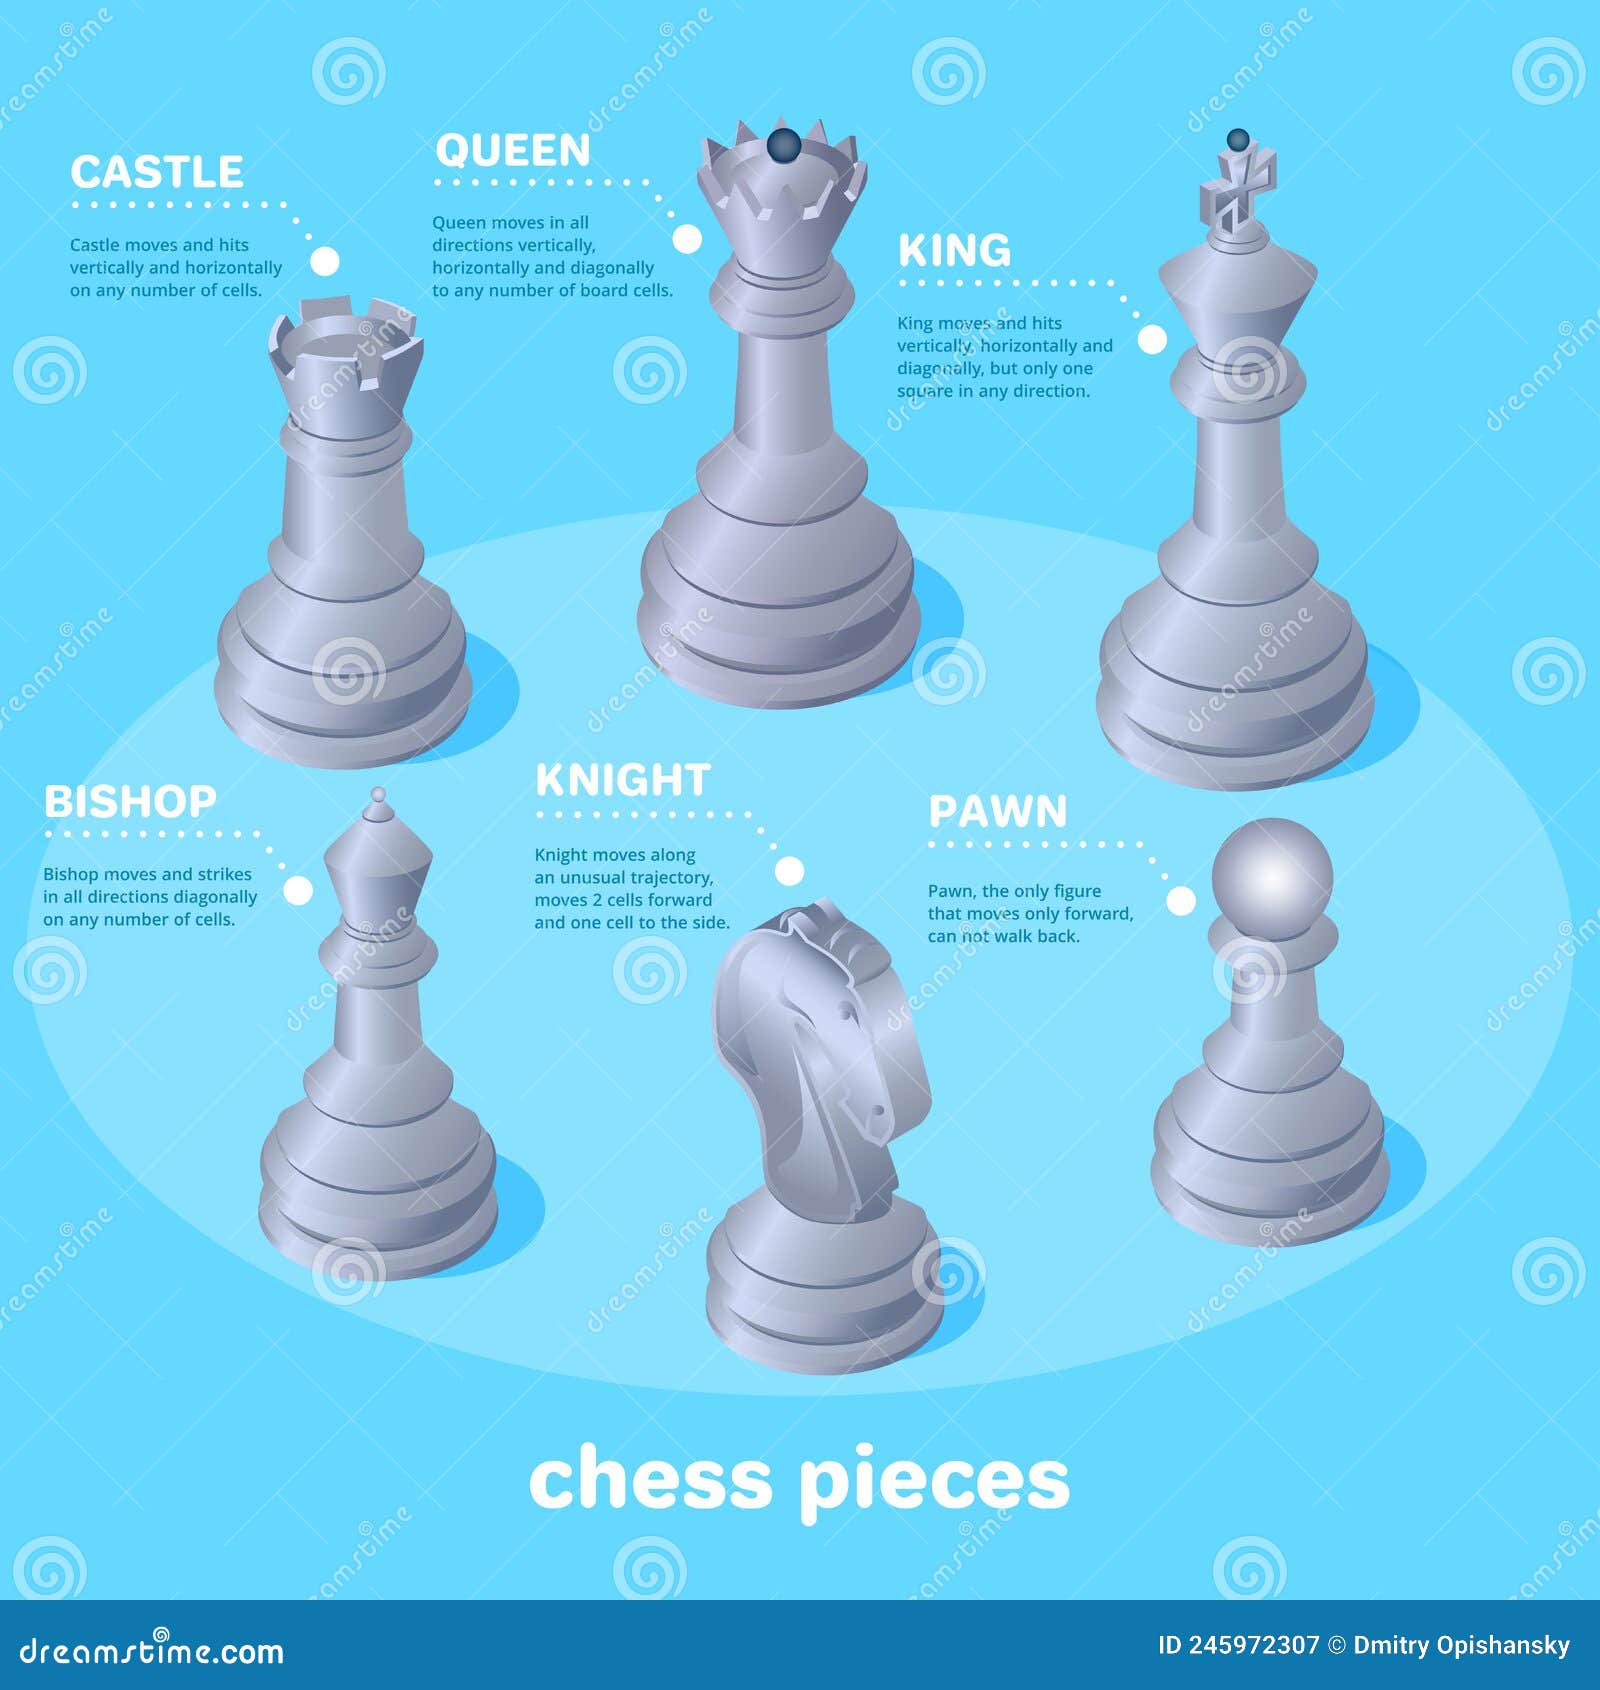 The Names of Chess Pieces at a Glance.